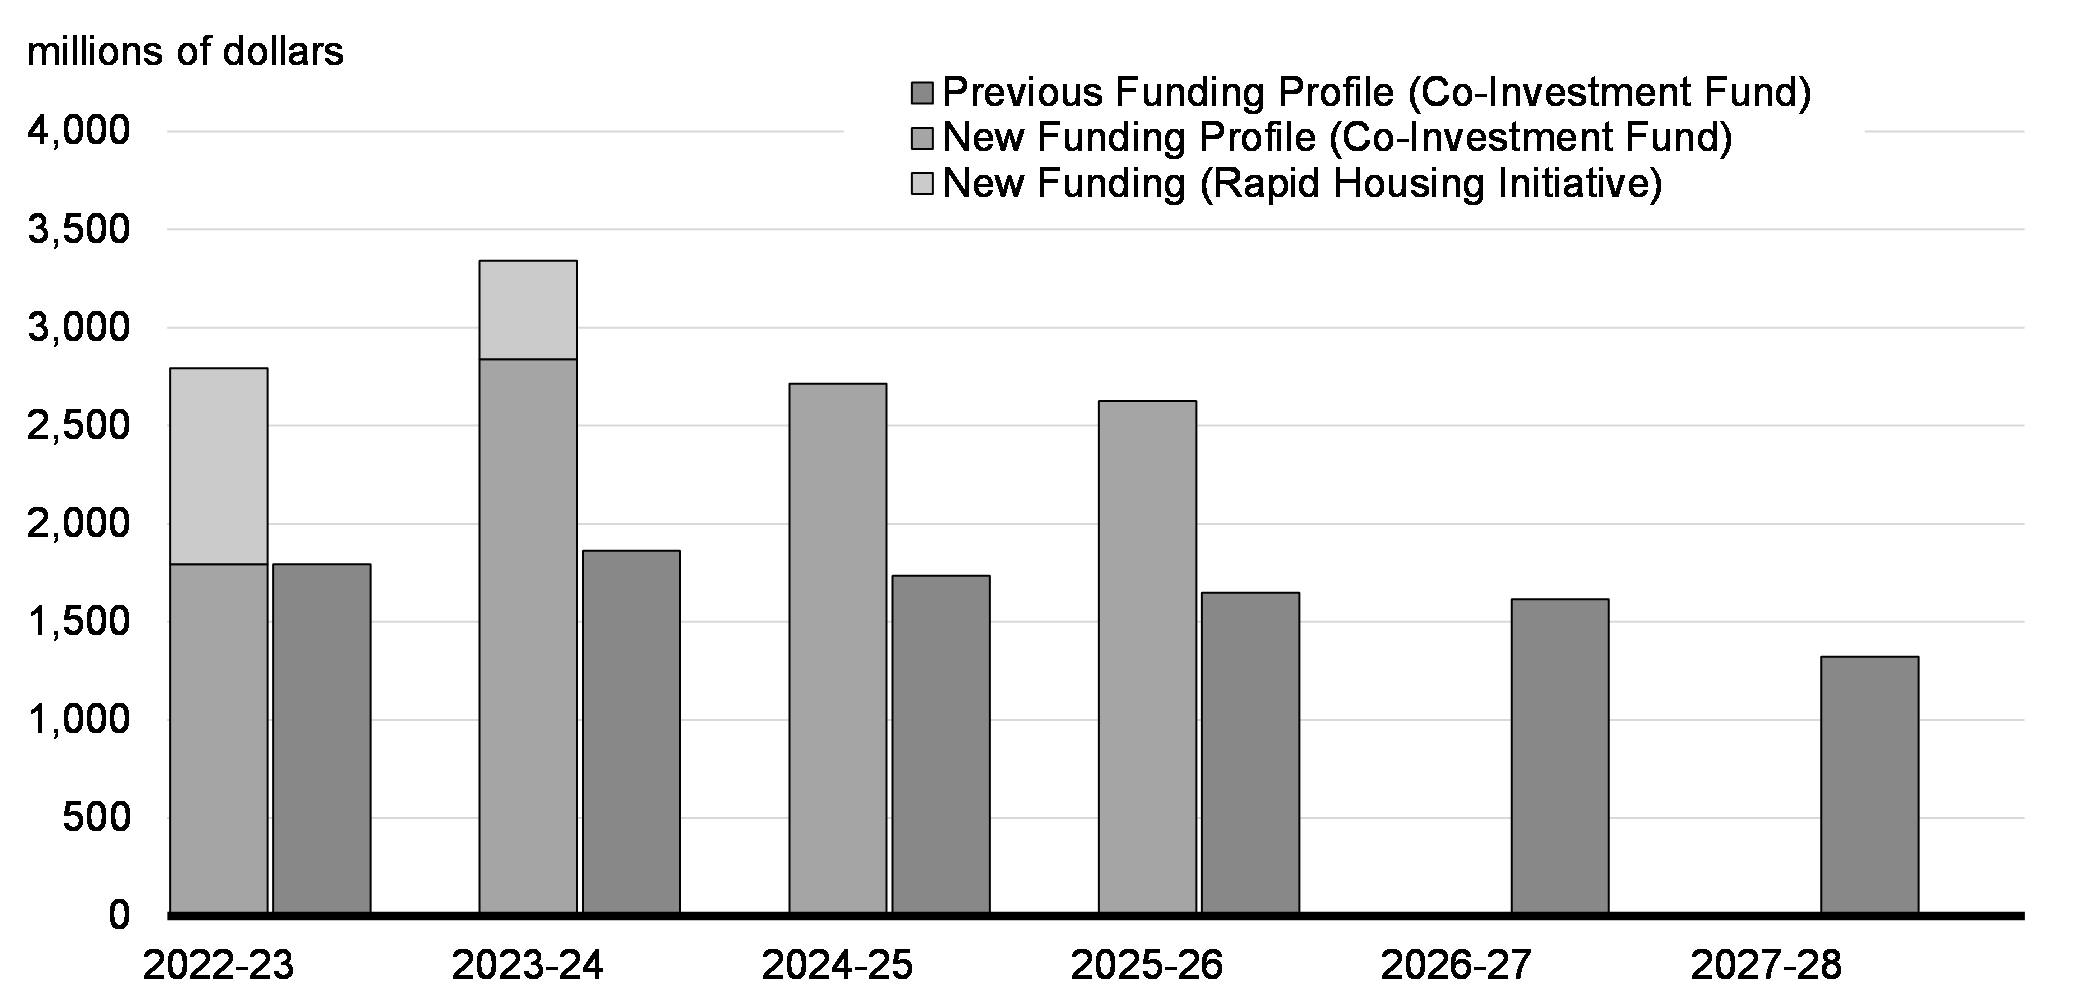 Chart 1.3: New Rapid Housing Initiative Spending and National Housing Co-Investment Funding Profile